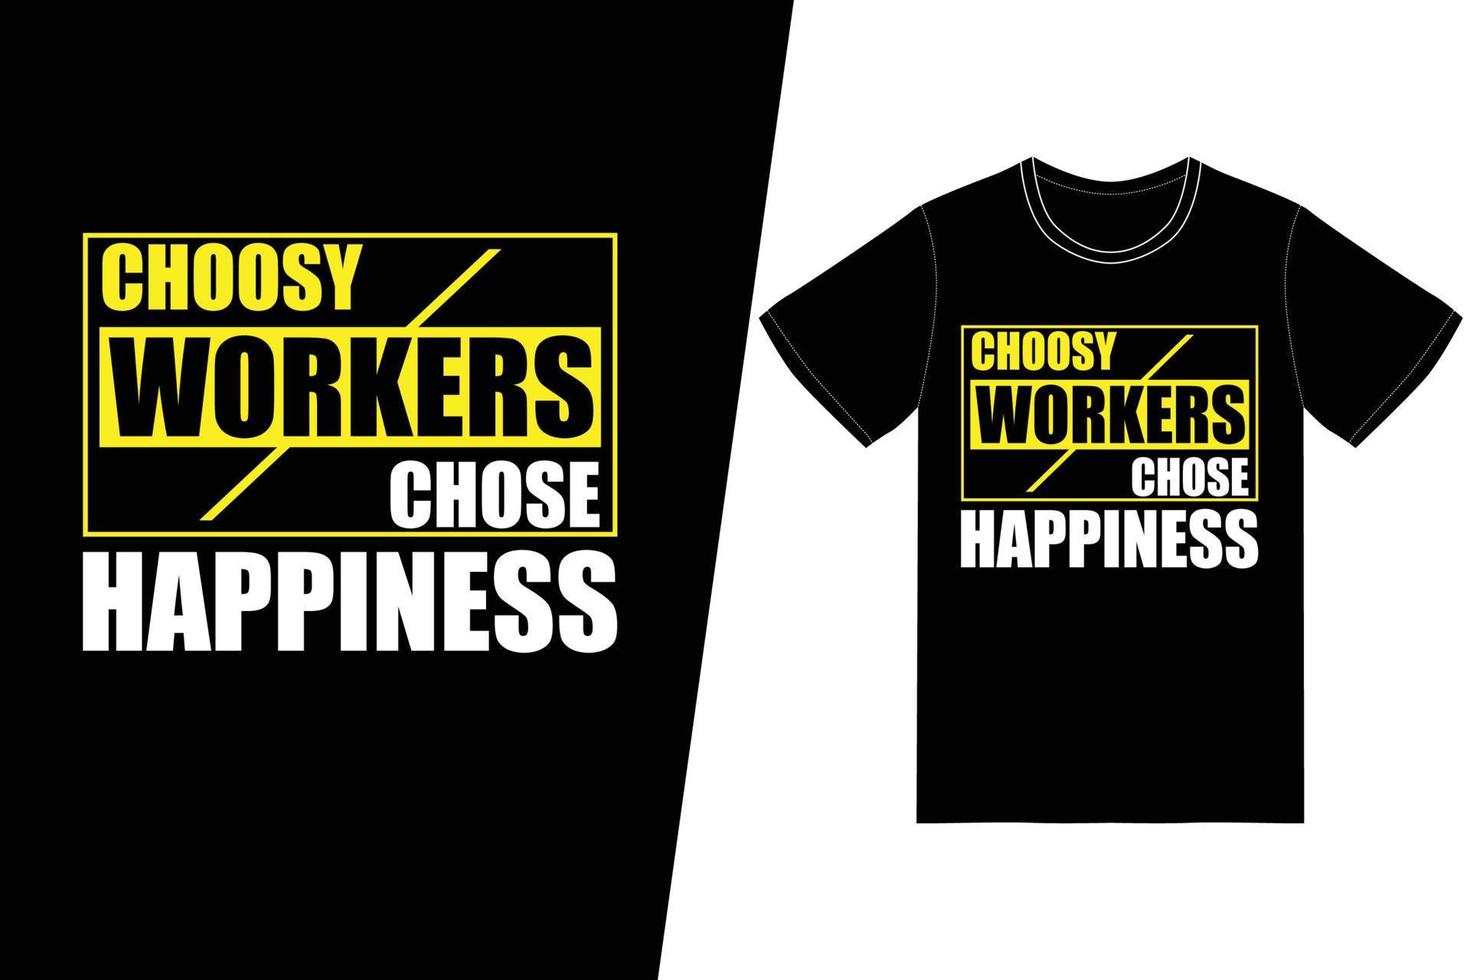 Choosy workers chose happiness t-shirt design. Labor day t-shirt design vector. For t-shirt print and other uses. vector